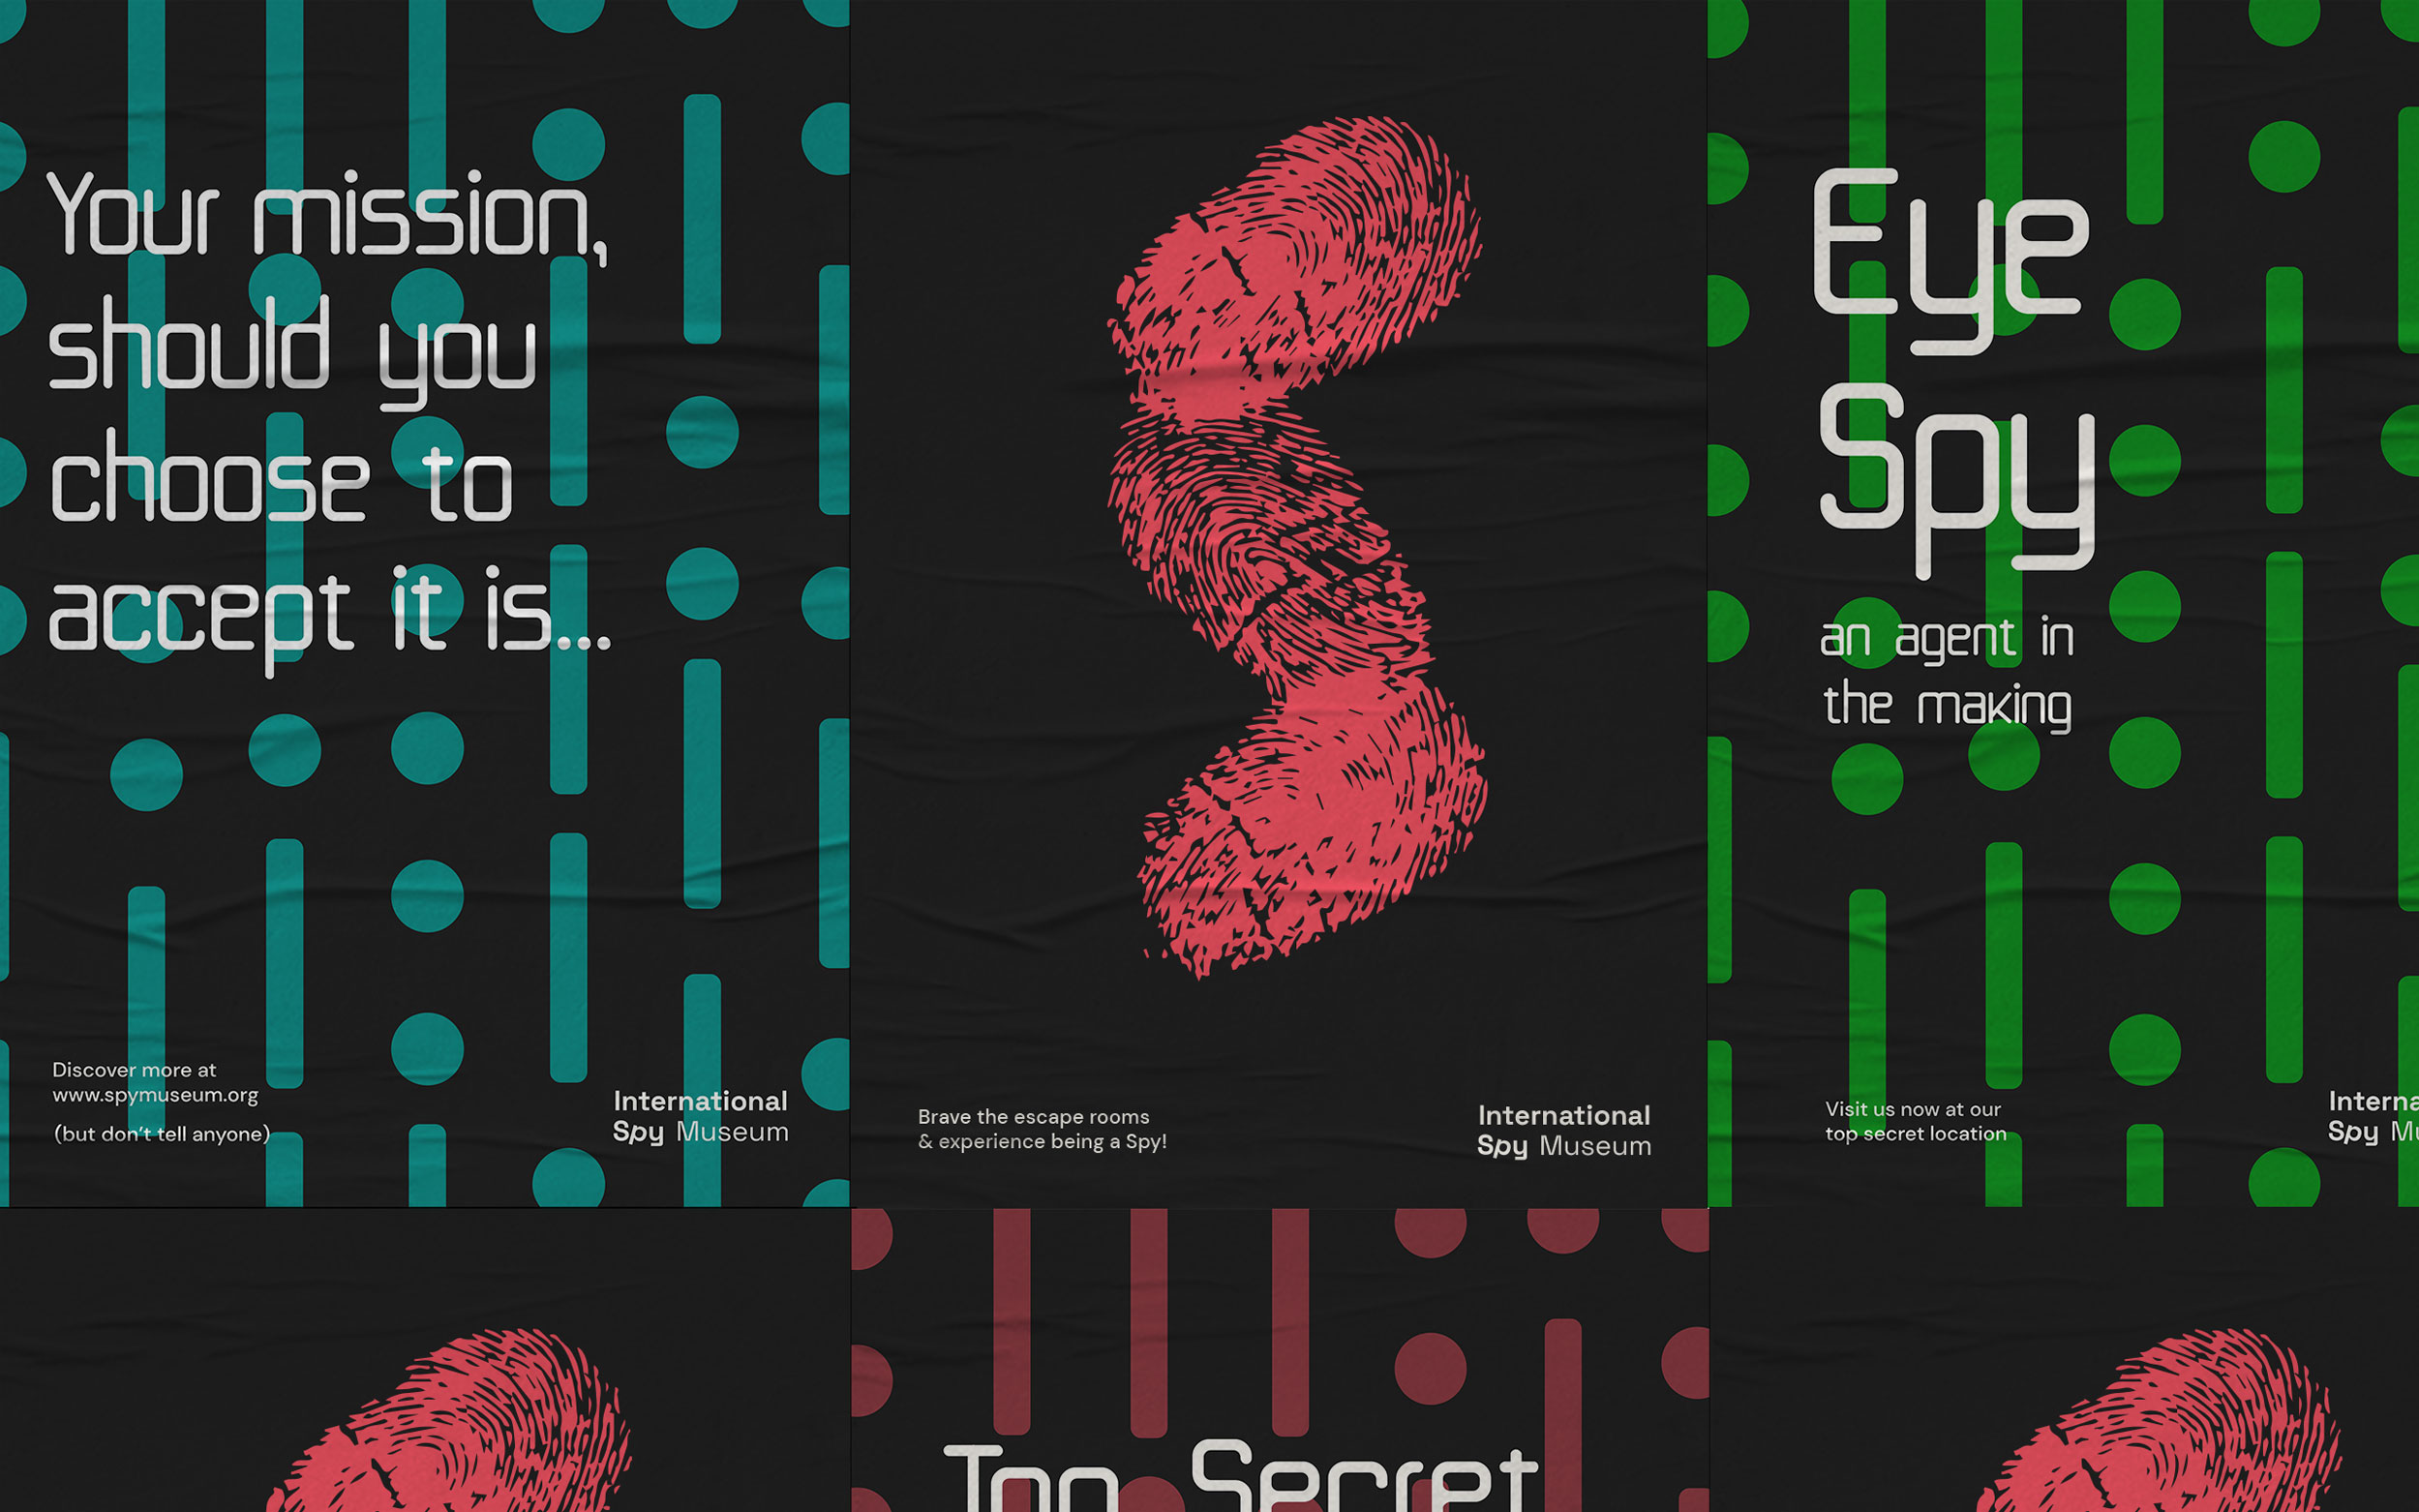 BA Graphic Communication work by Jasmine Parkin showing posters for the International Spy Museum. Black posters with neon blue, red and green visuals.